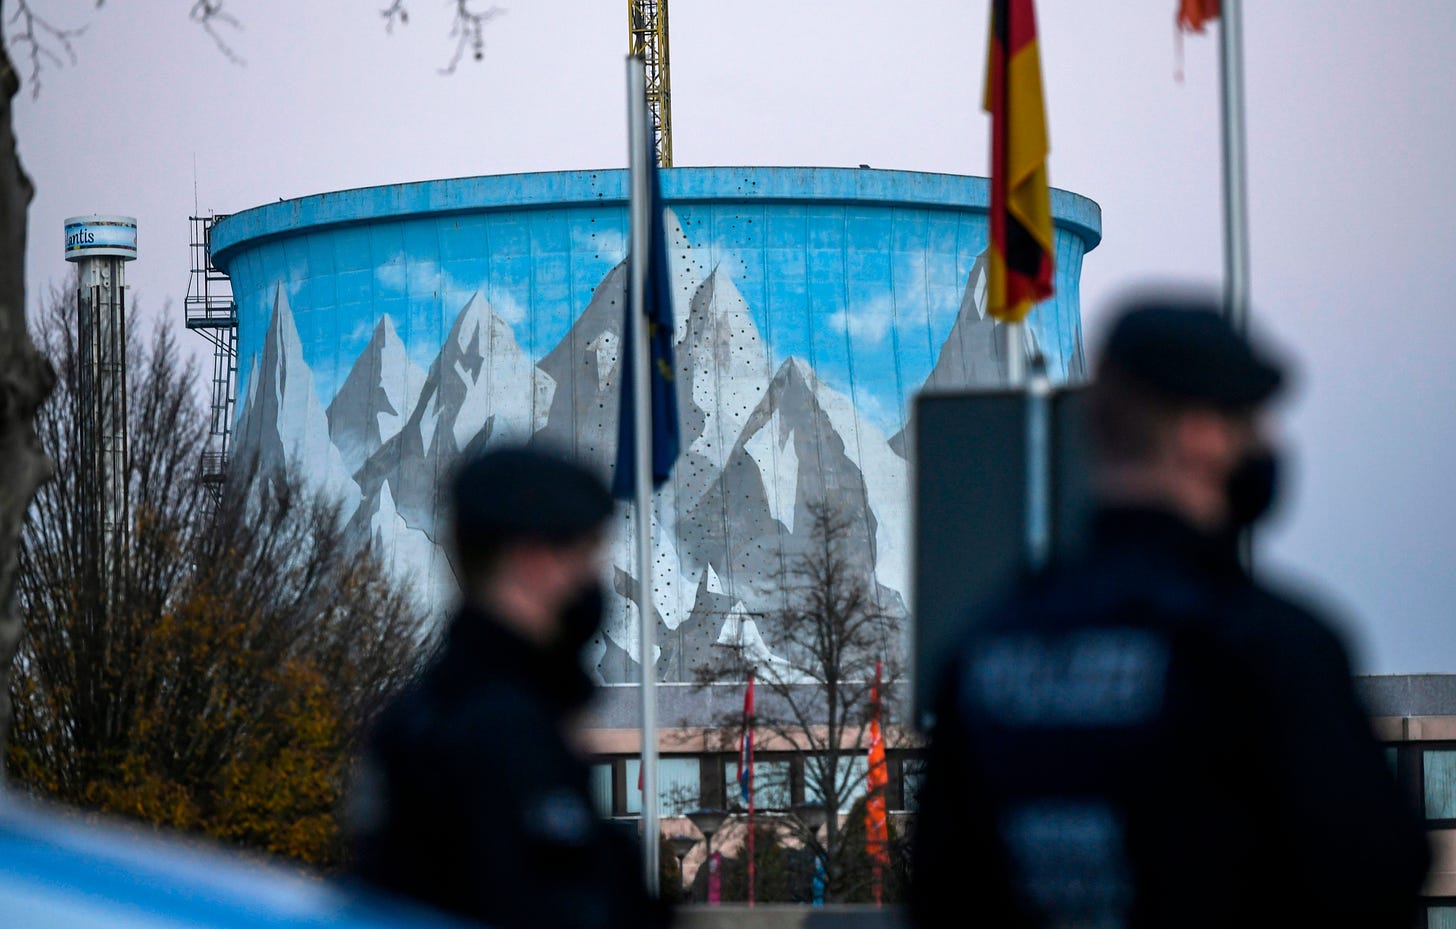 Police officers stand in front of a former nuclear power plant during an anti-AFD protest in November 2020. (Photo by Ina Fassbender / AFP via Getty Images.)